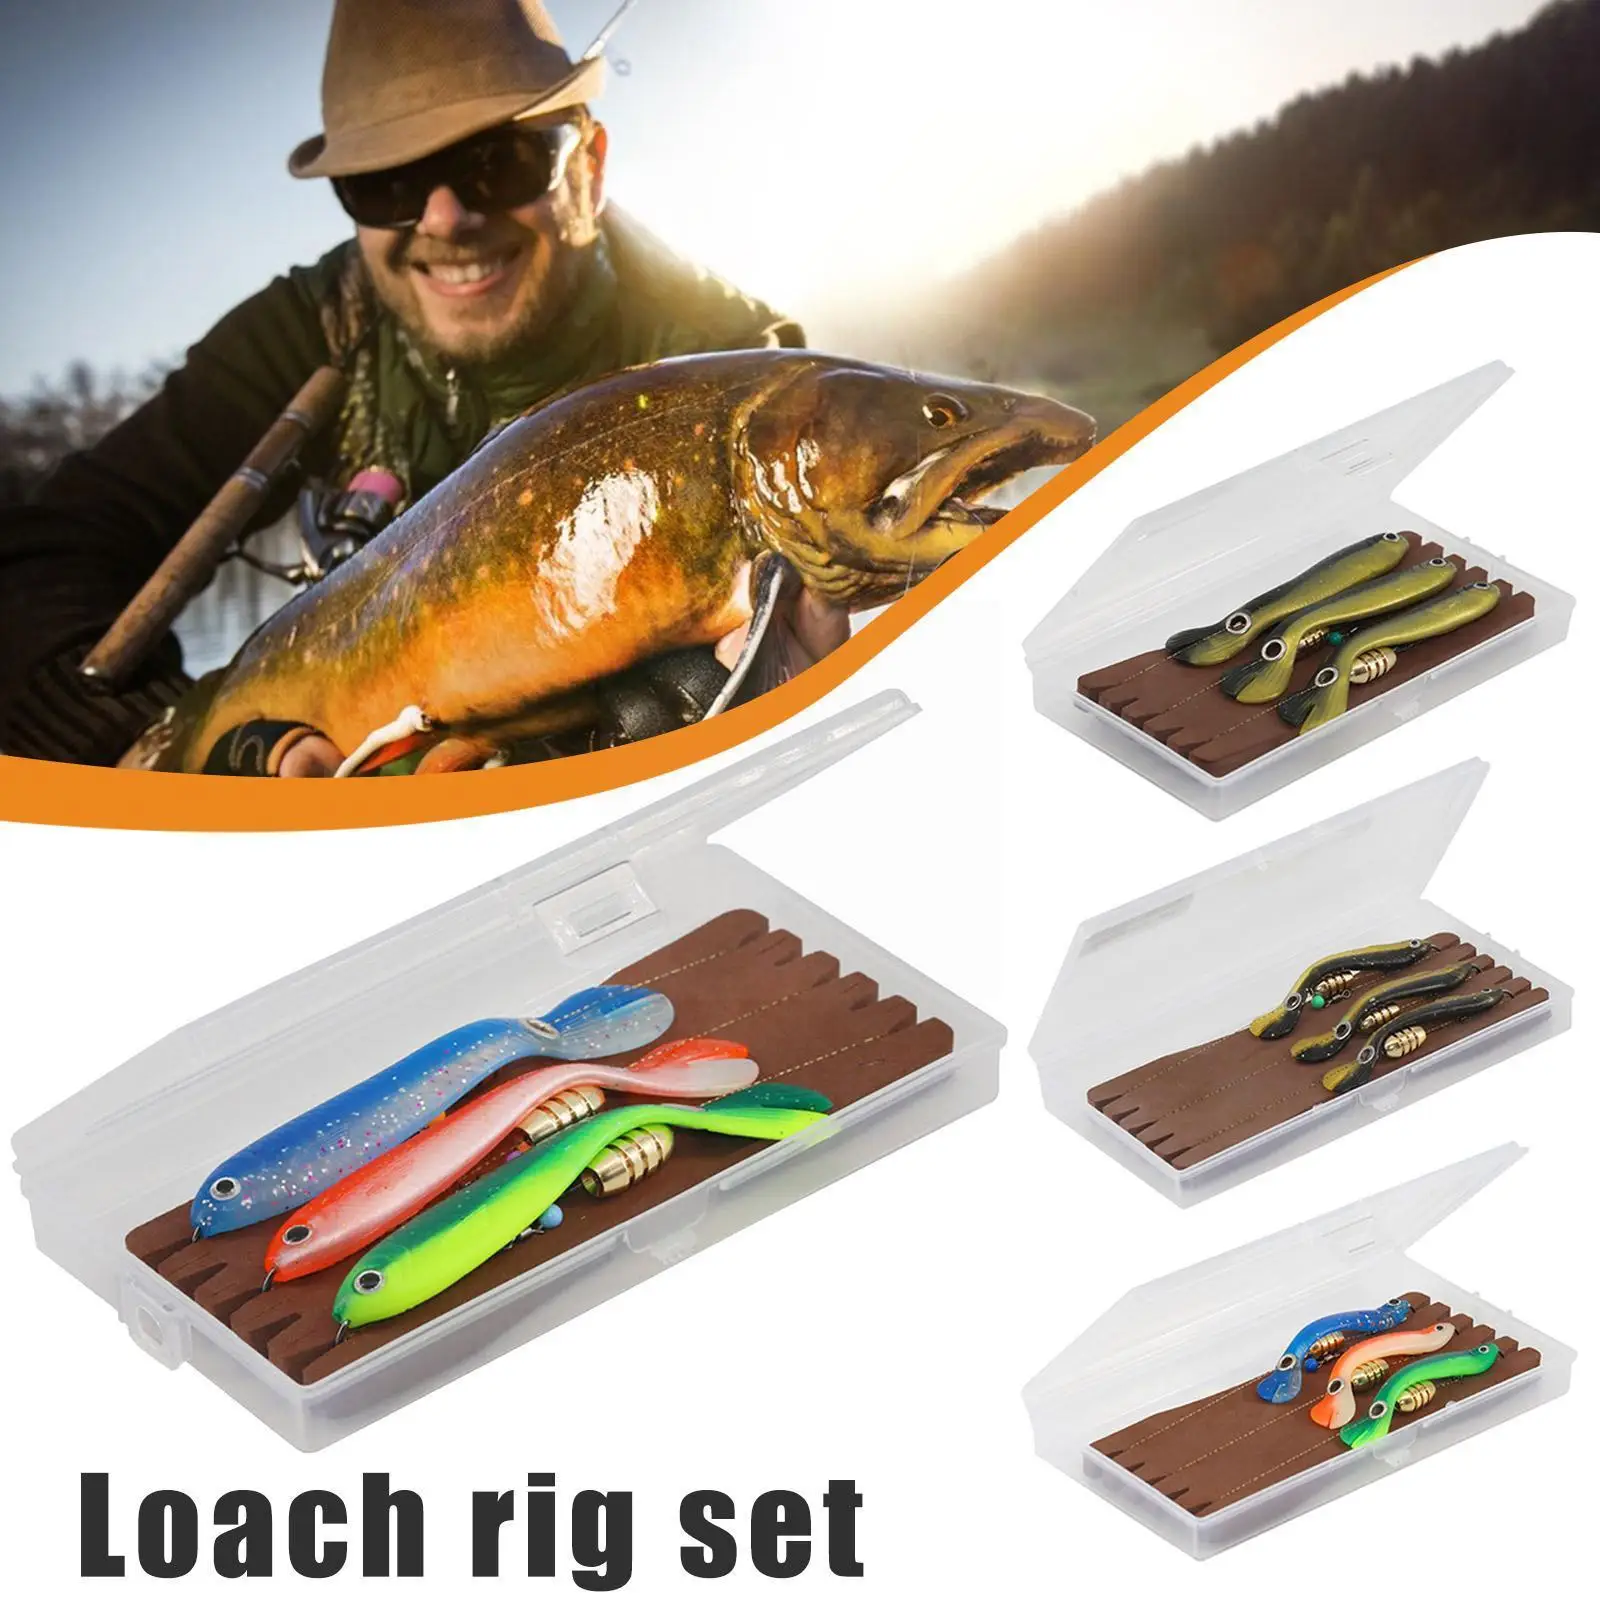 

Fishing Lures Fishing Equipment Simulation Loach Simulation Soft Bait Pre-Rigged Fishing Bait For Saltwater & Freshwater Fi D3T7